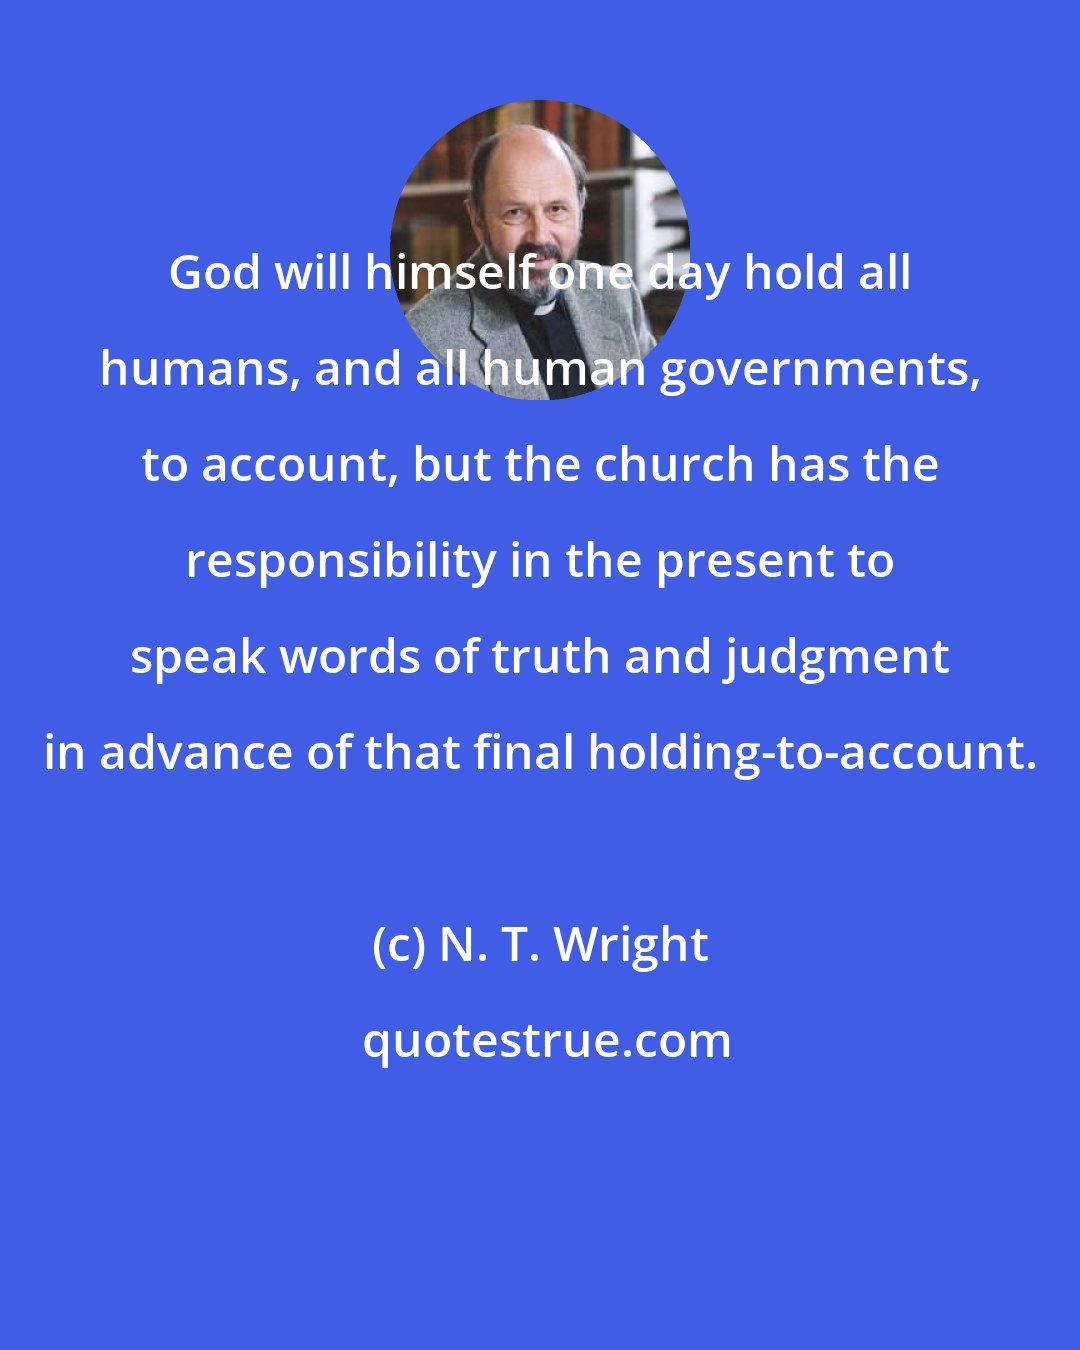 N. T. Wright: God will himself one day hold all humans, and all human governments, to account, but the church has the responsibility in the present to speak words of truth and judgment in advance of that final holding-to-account.